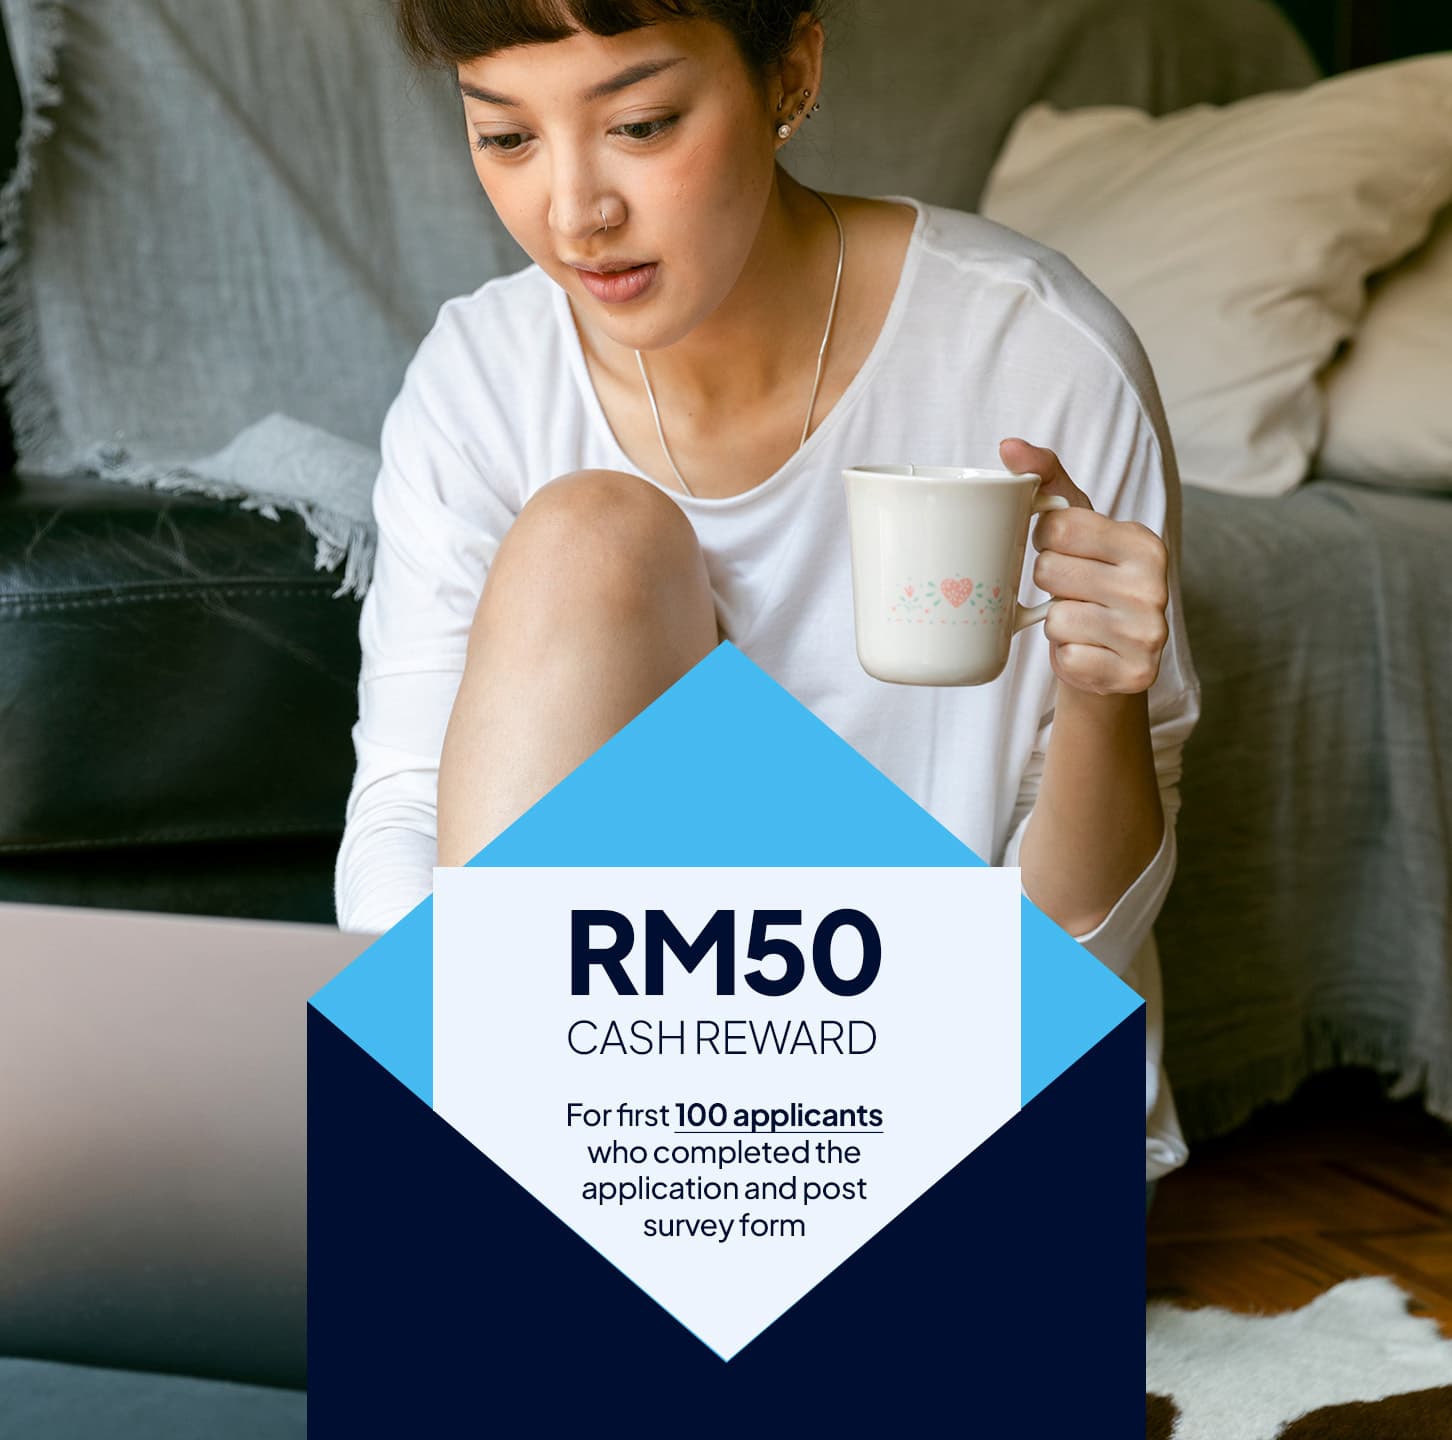 Advertises the RM50 cash reward for being one of the first 100 beta testers of UrbanVault who complete an application and survey. Backdrop shows an interested person looking at a laptop holding a drink.